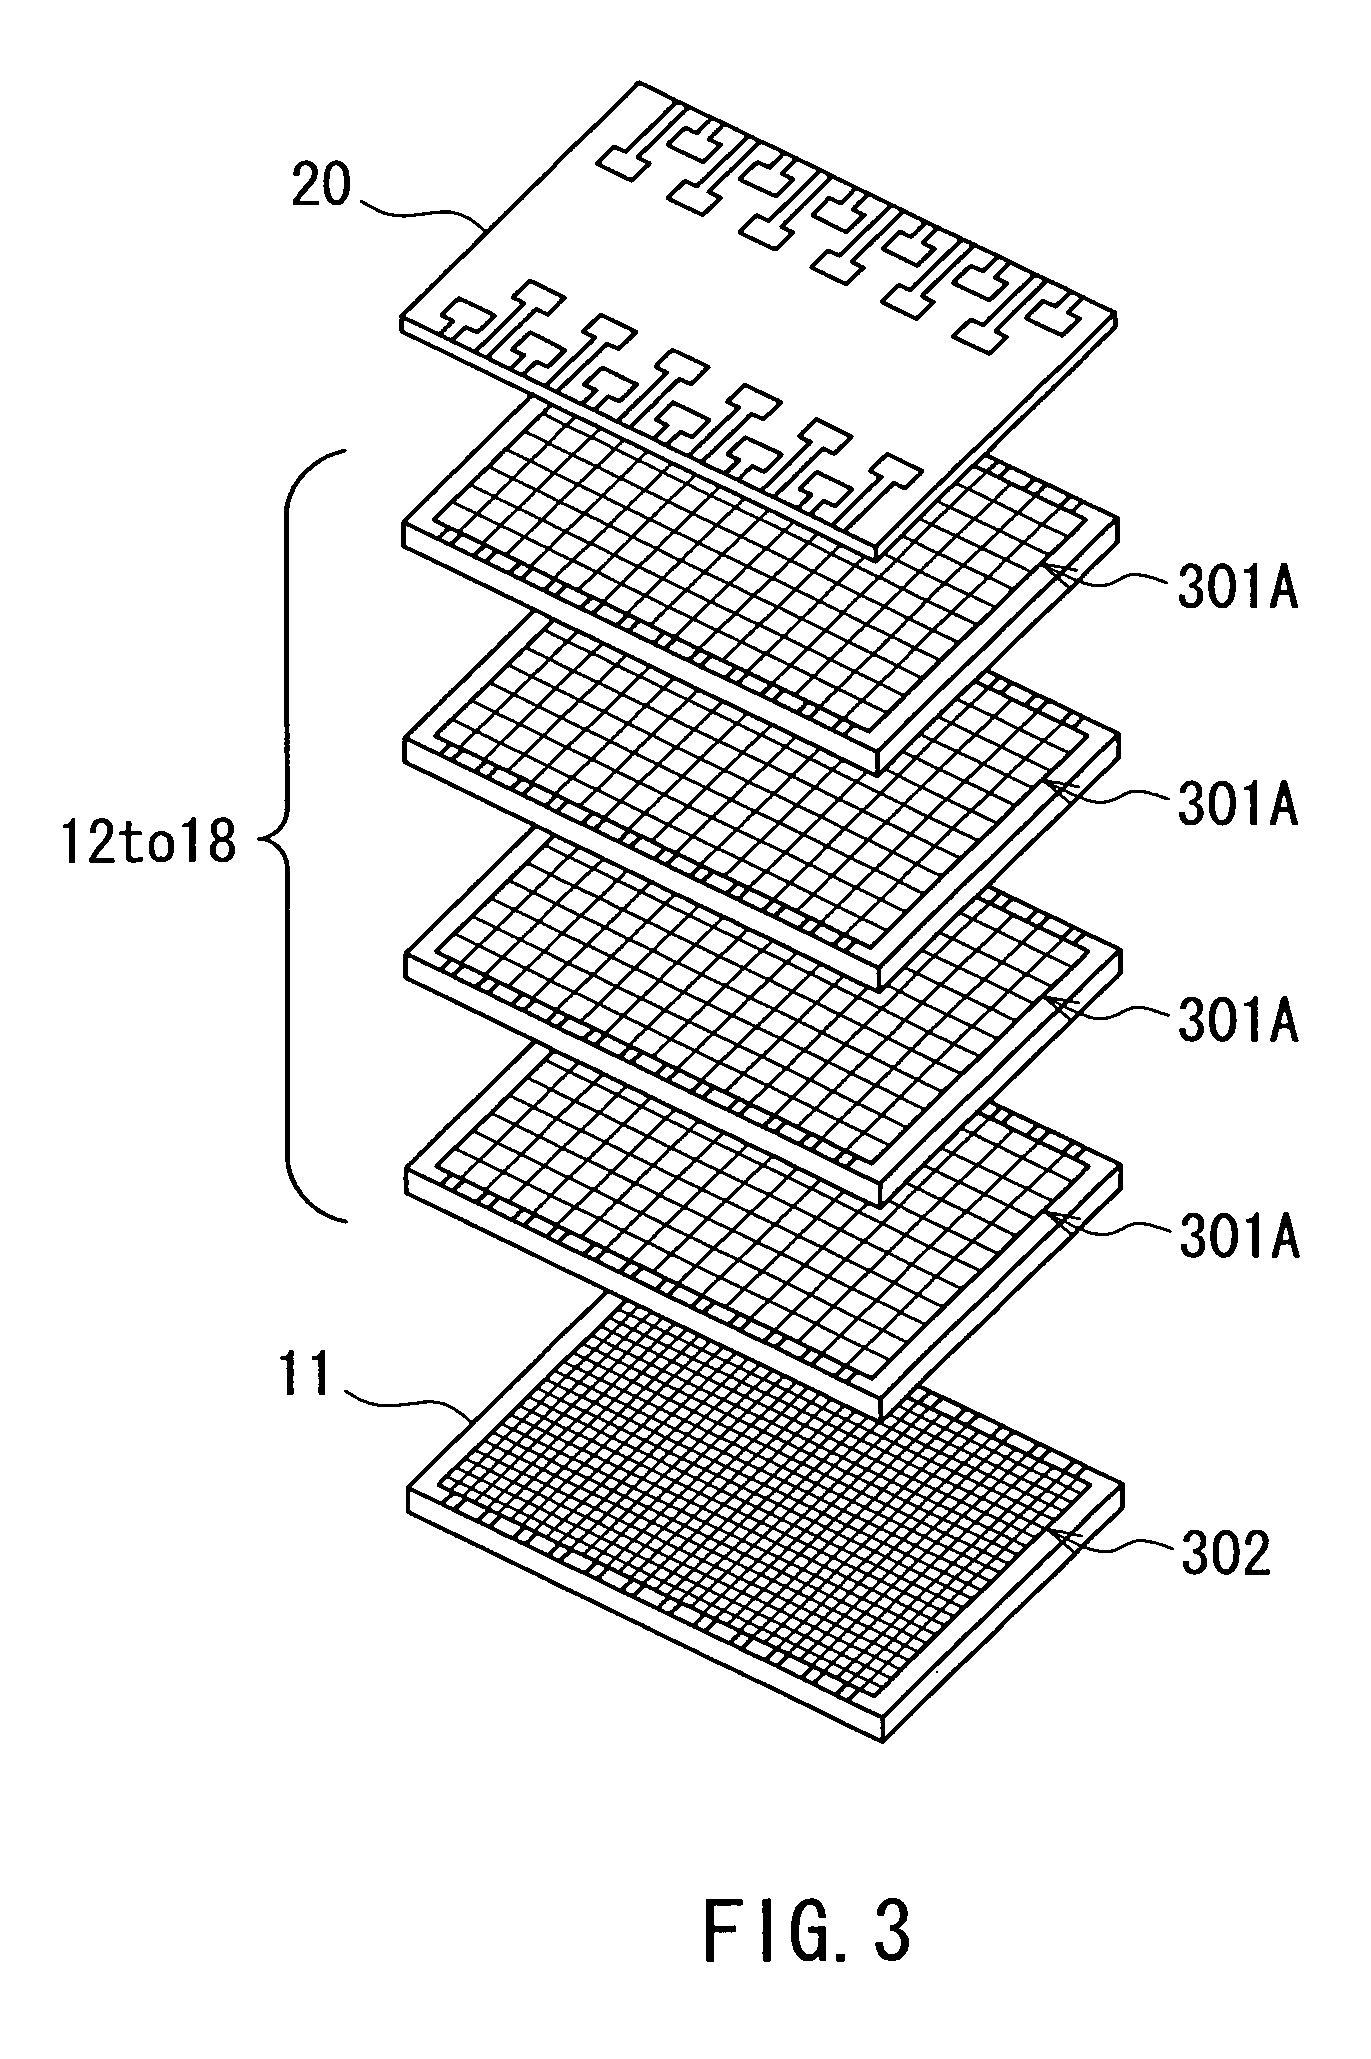 Layered chip package that implements memory device